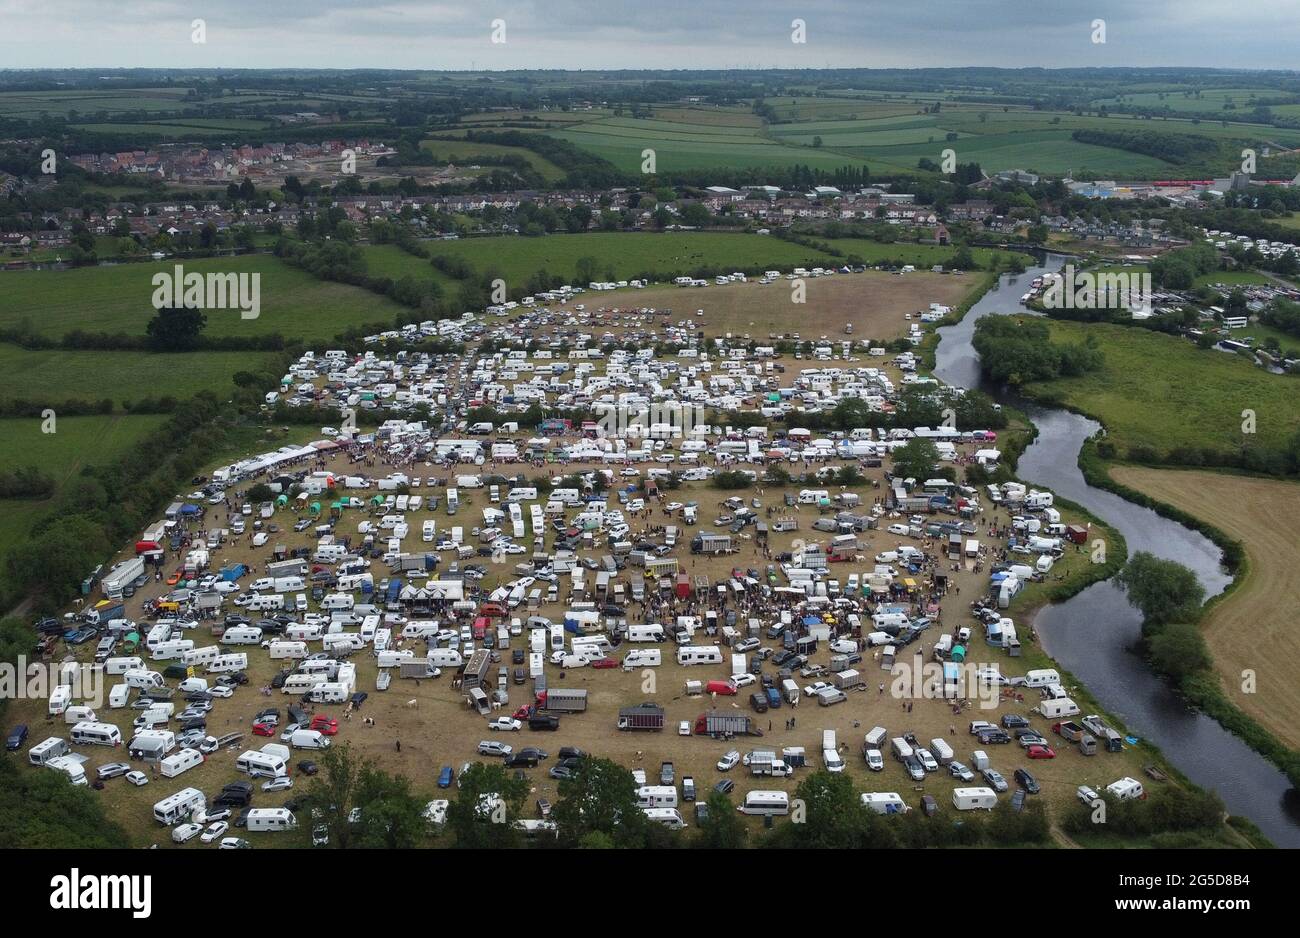 Mountsorrel, Leicestershire, UK. 26th June 2021. An aerial view of the Betty Hensers Horse Fair sited next to the River Soar. Leicestershire Police and Charnwood Borough Council are working together to offer guidance and support to the organisers after concerns about possible breaches in Covid-19 regulations and the impact on local communities. Credit Darren Staples/Alamy Live News. Stock Photo